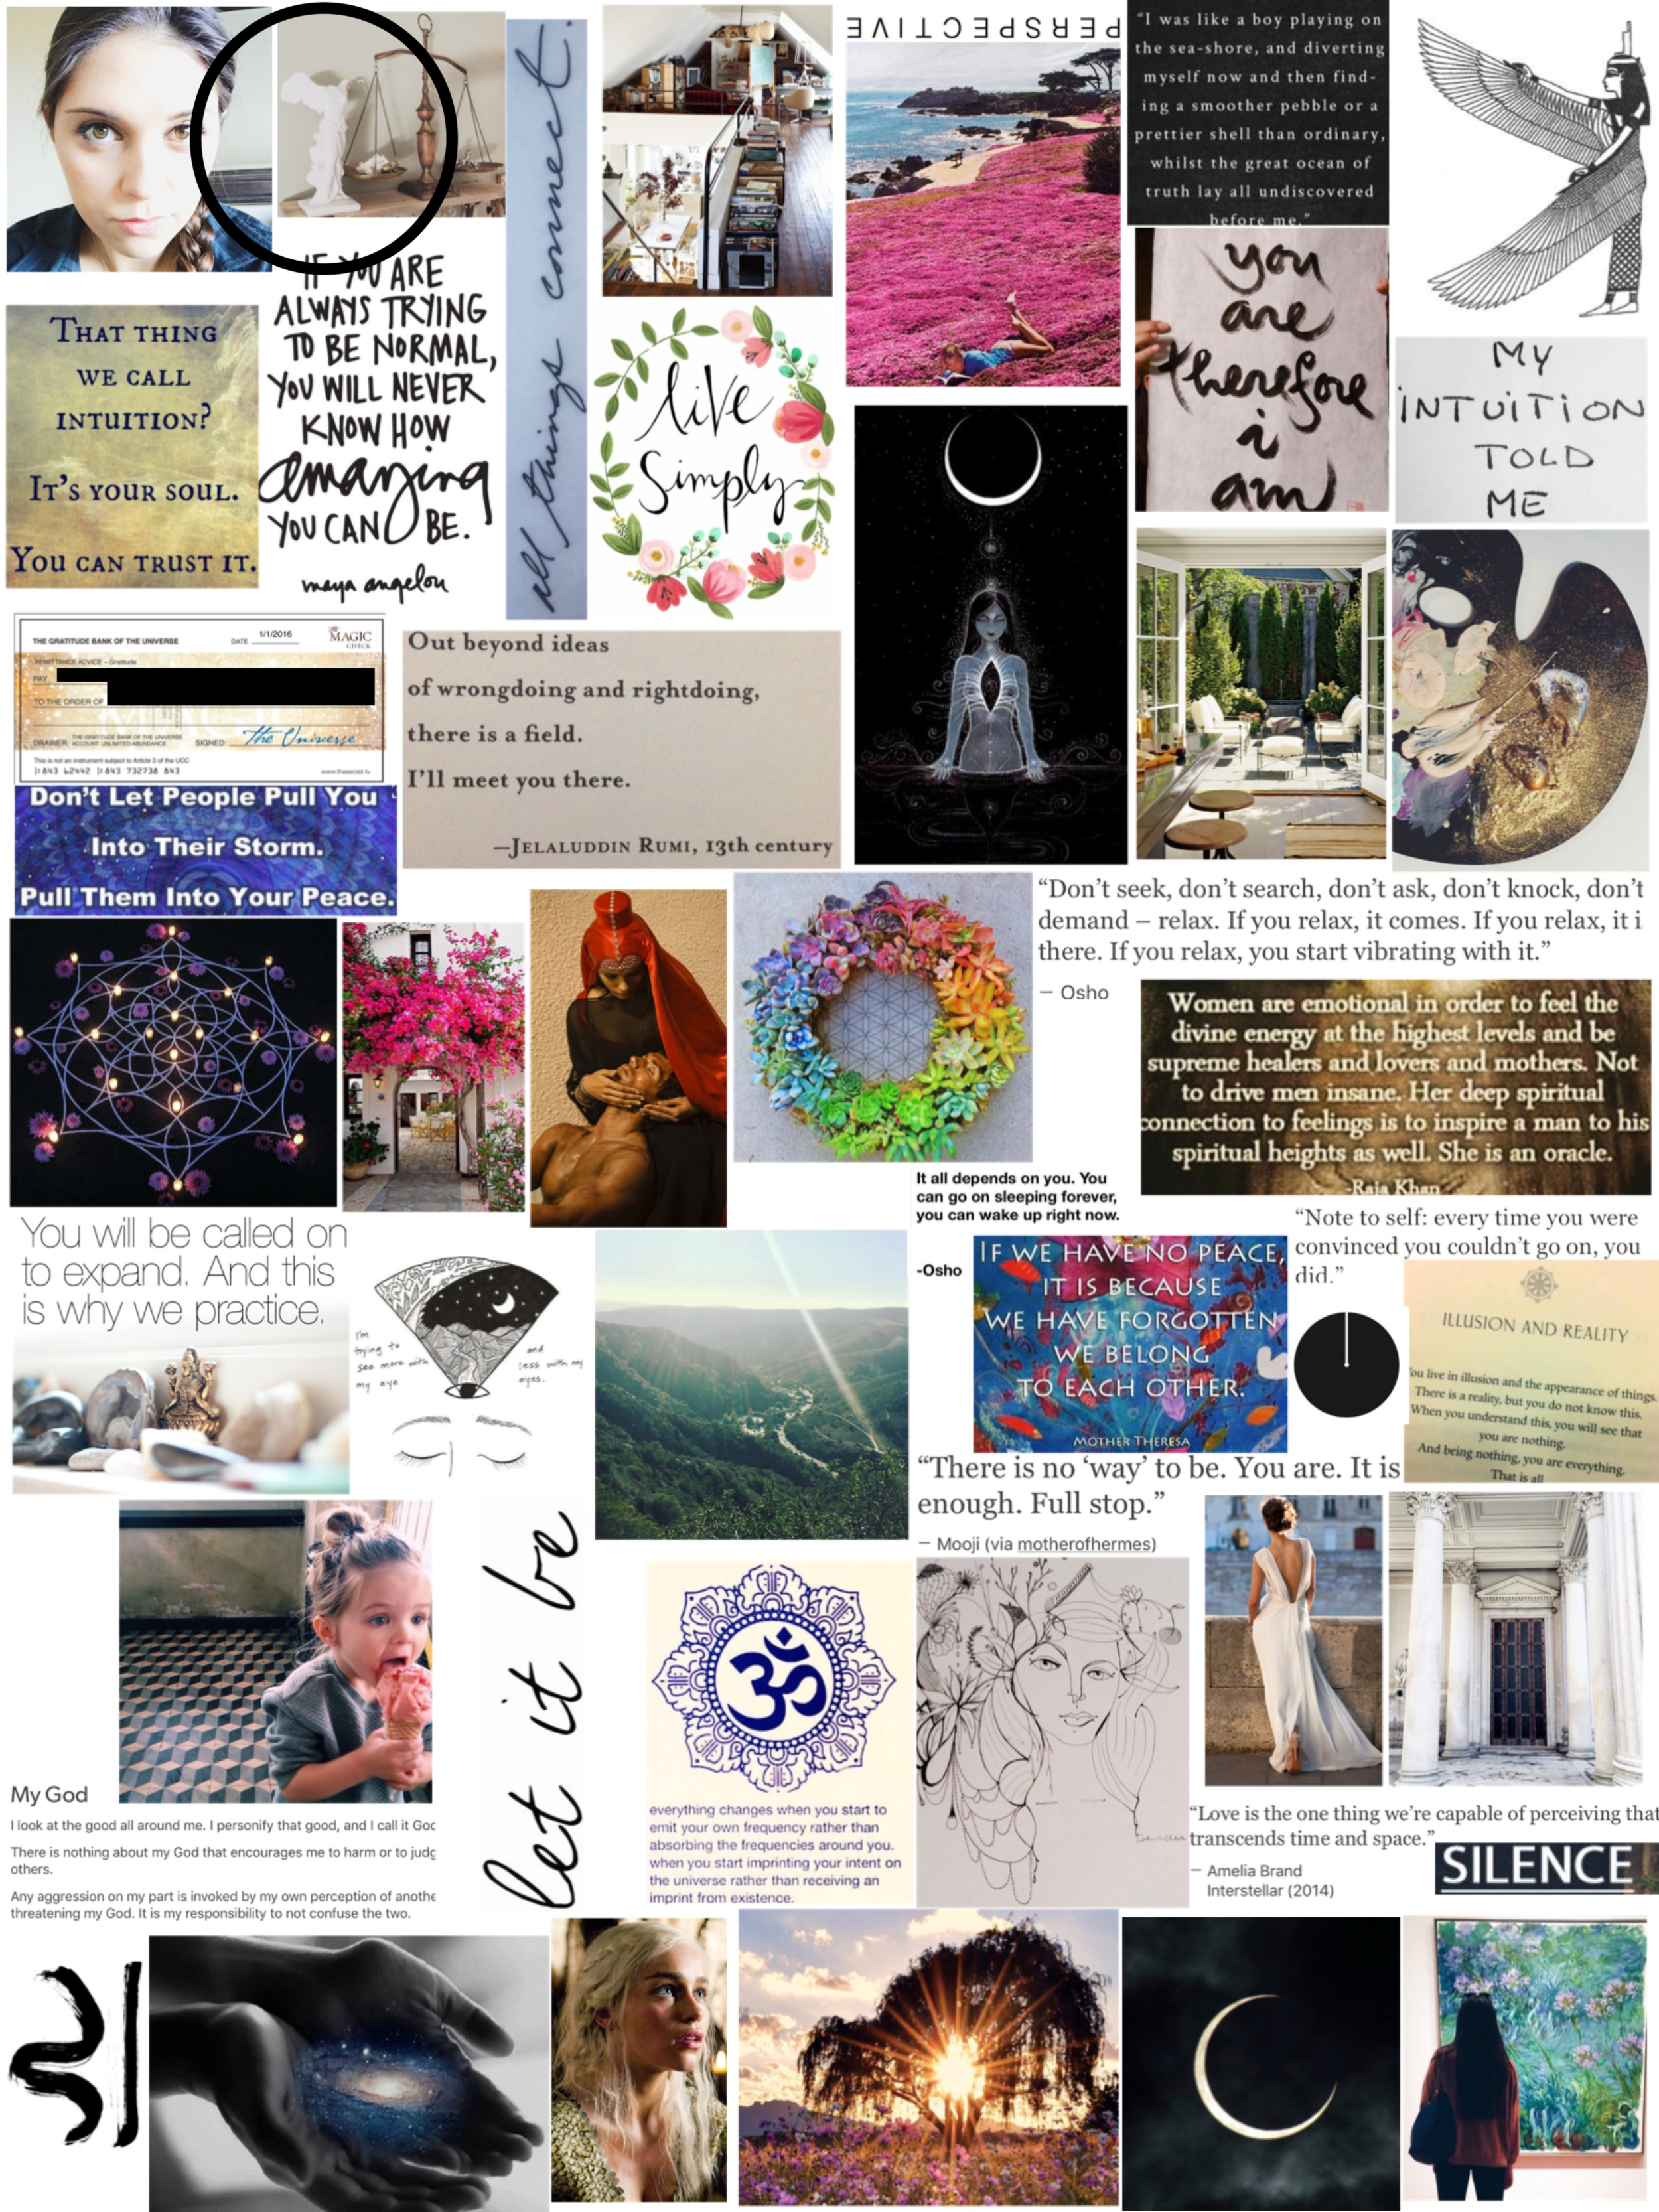 How To Create An Online Vision Board for Inspiration